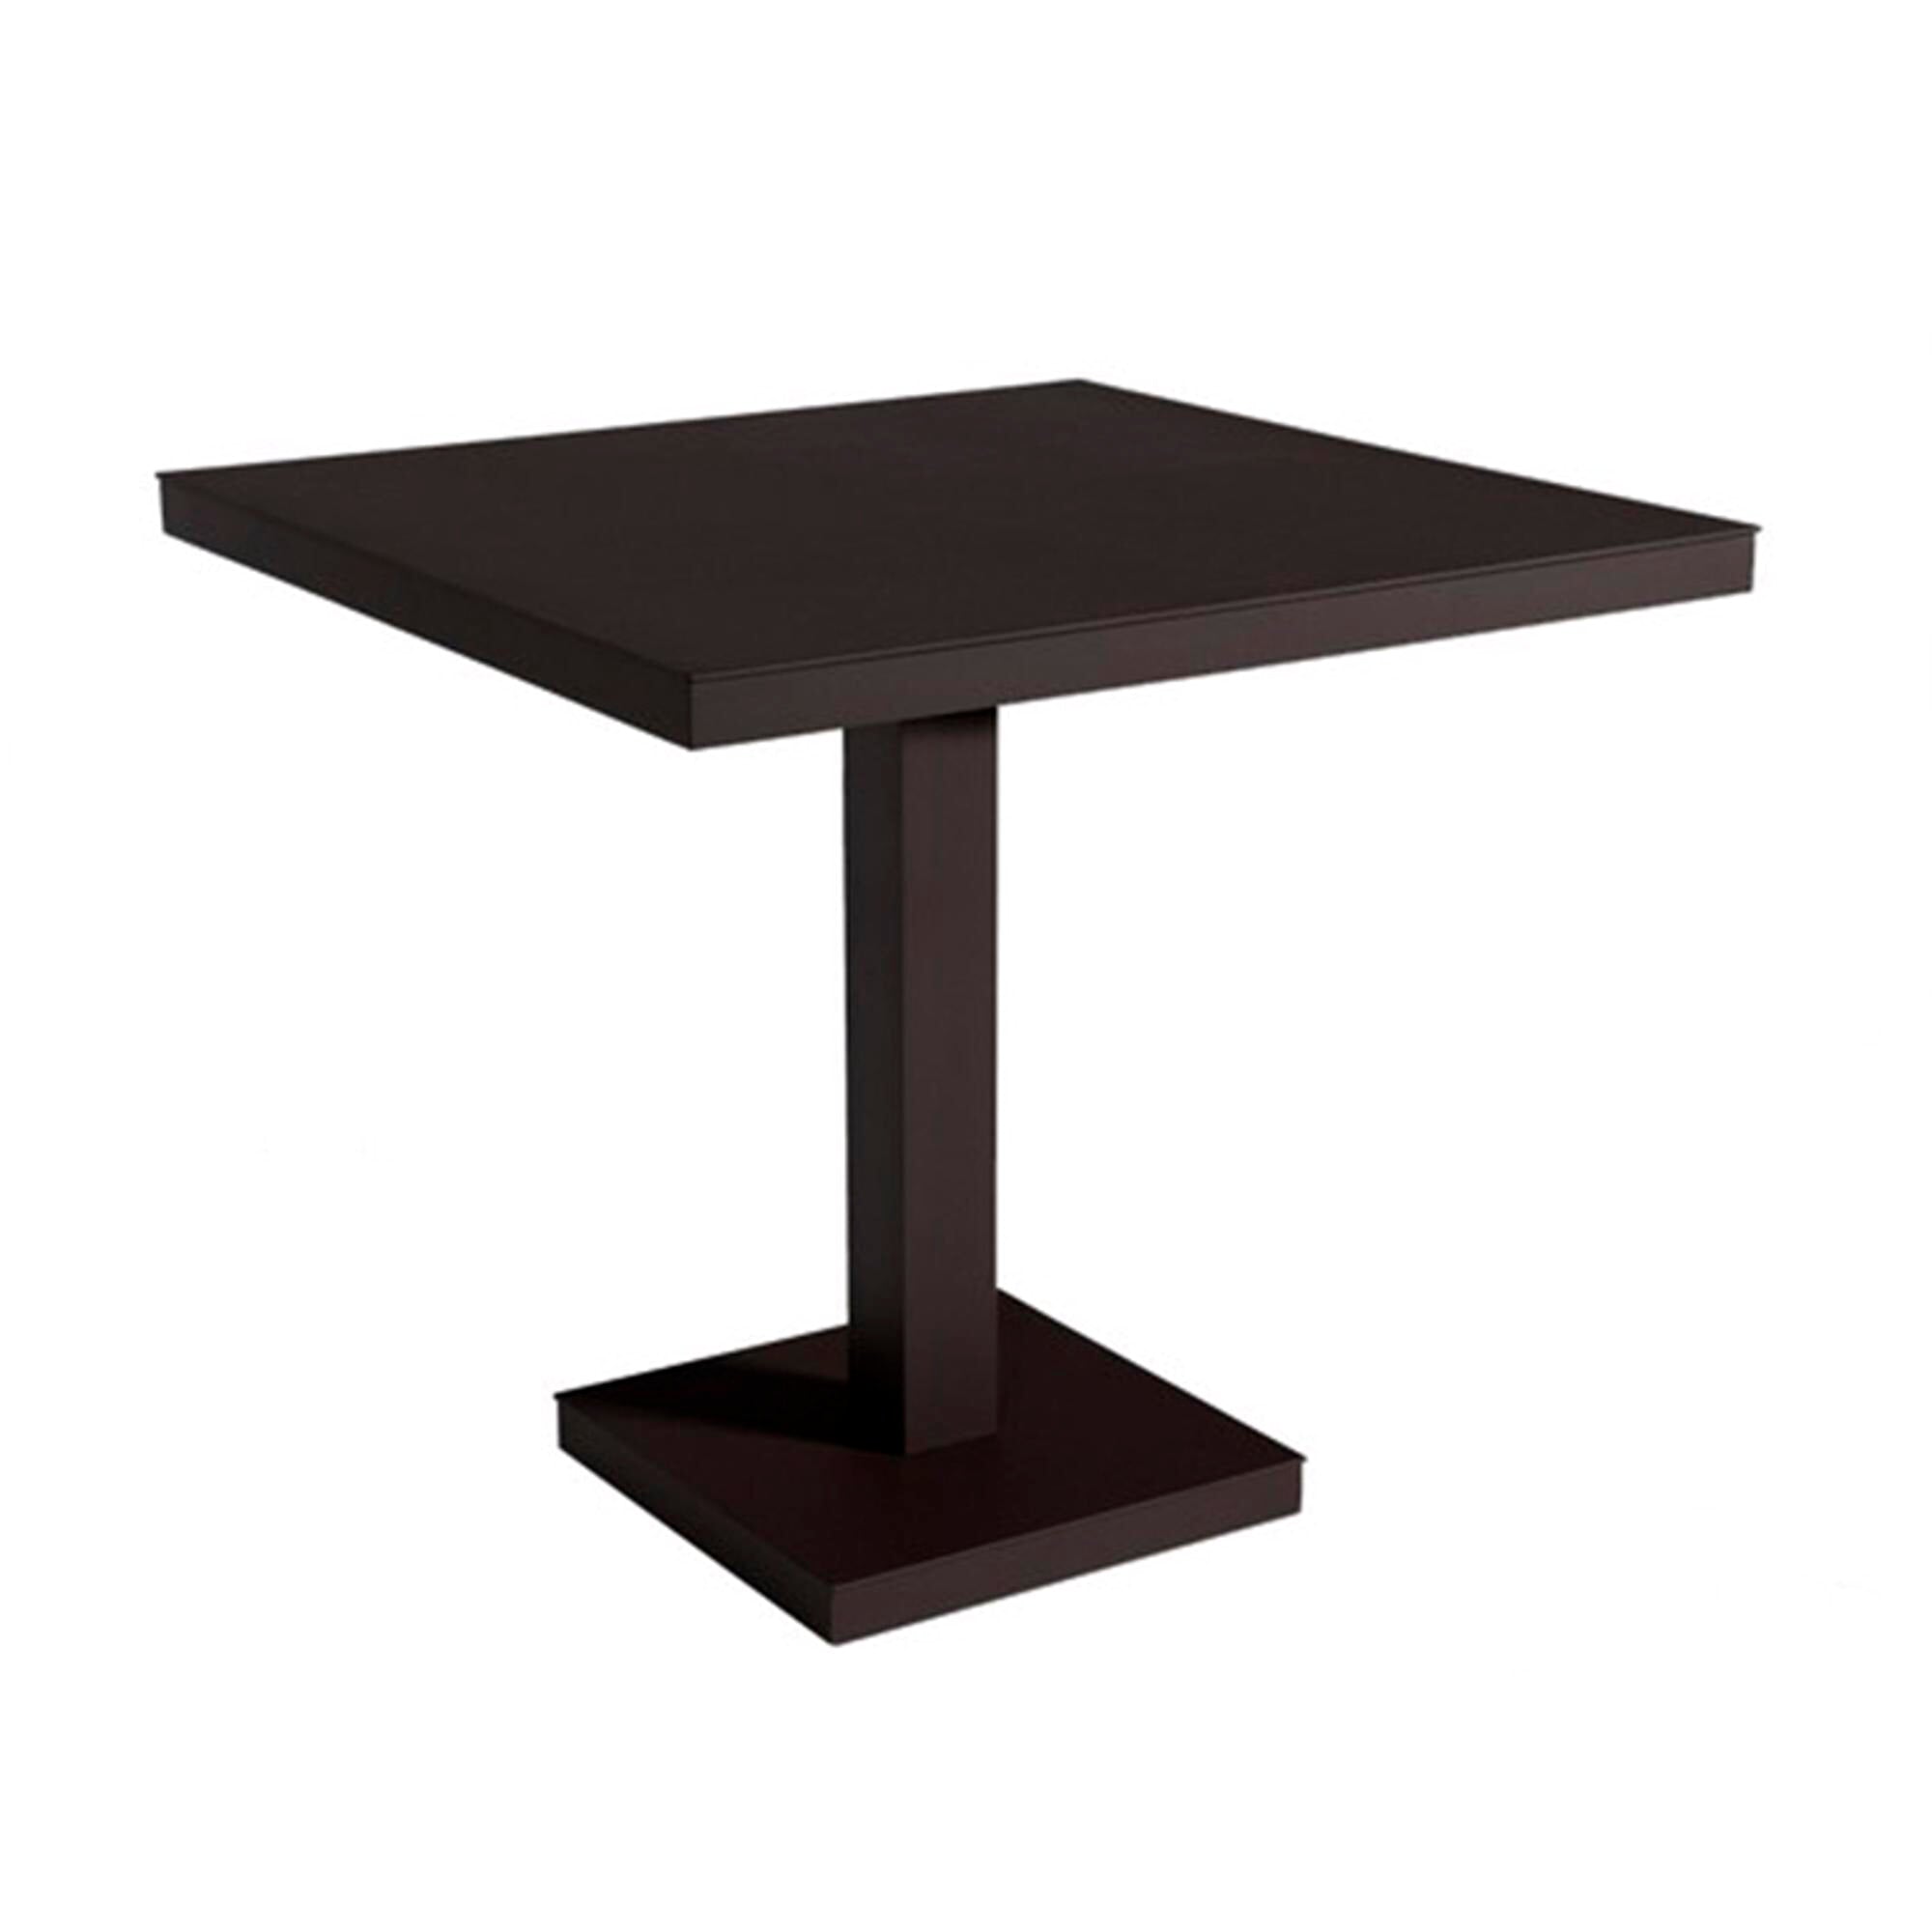 Resol Barcino Square Table indoors, outdoor 90x90 black